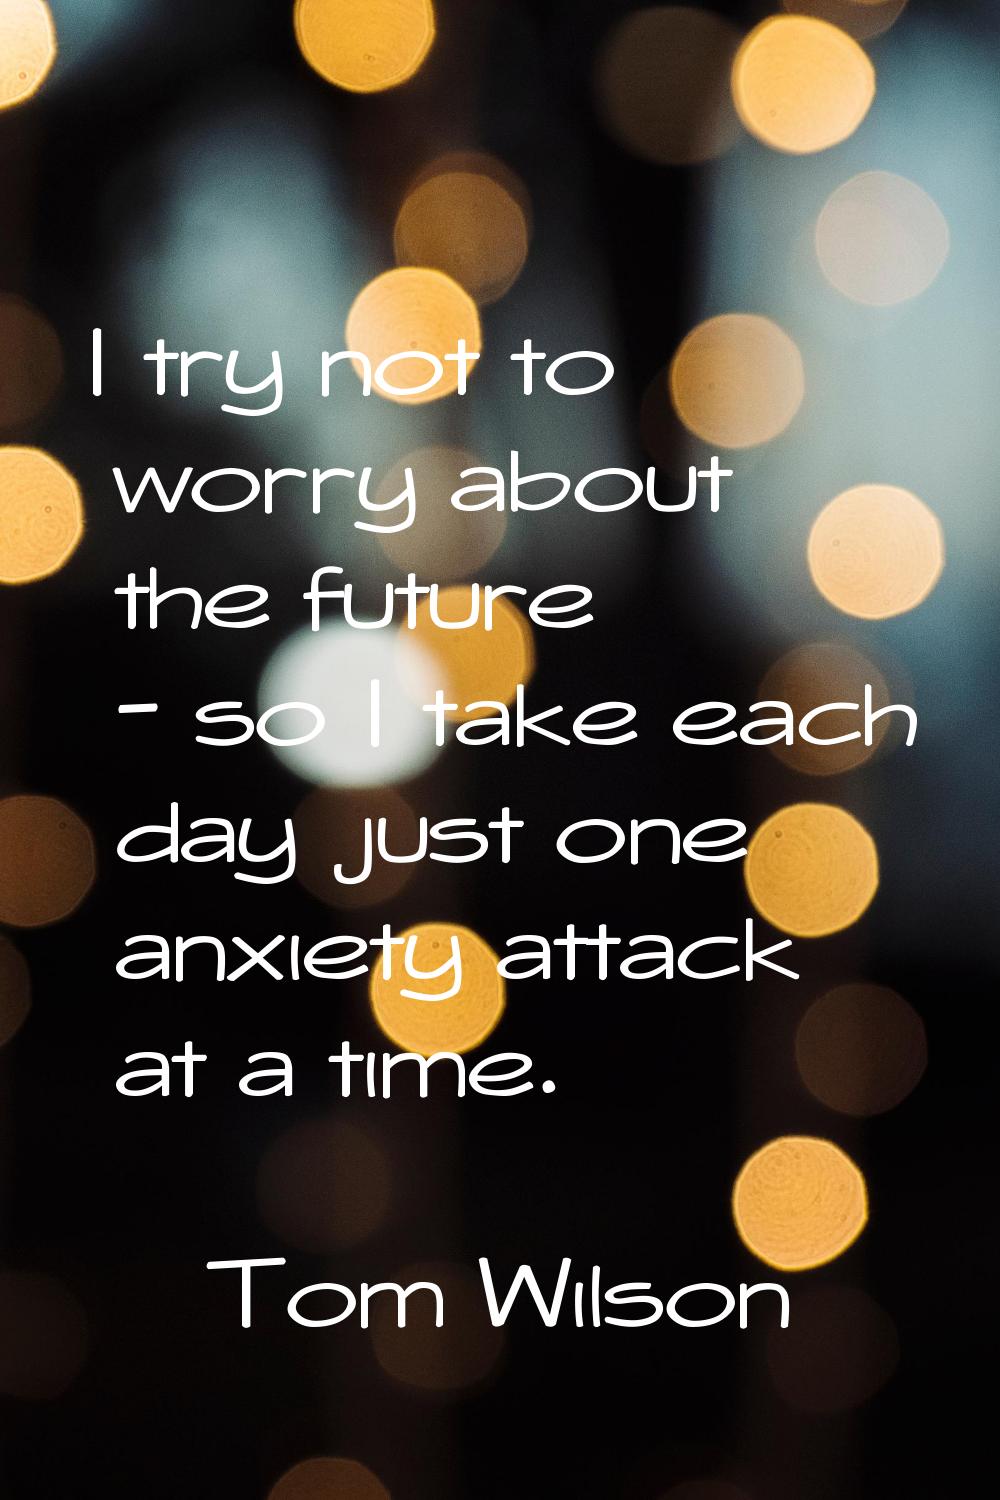 I try not to worry about the future - so I take each day just one anxiety attack at a time.